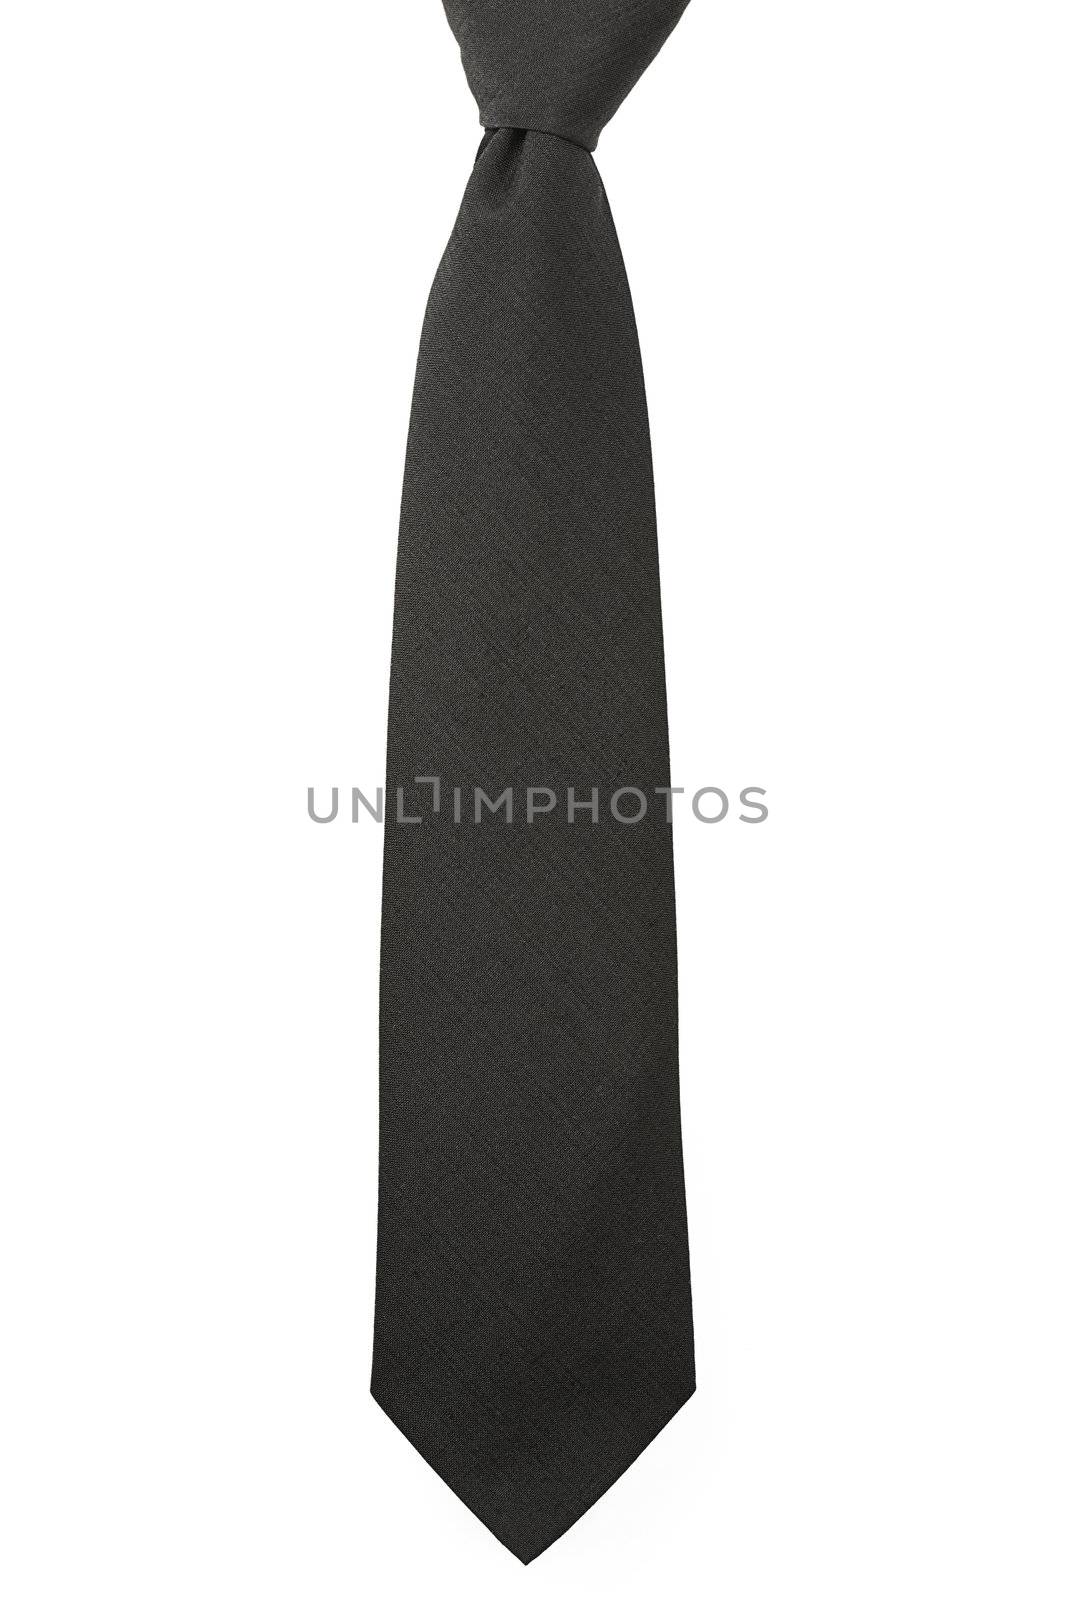 black tie isolated on white background